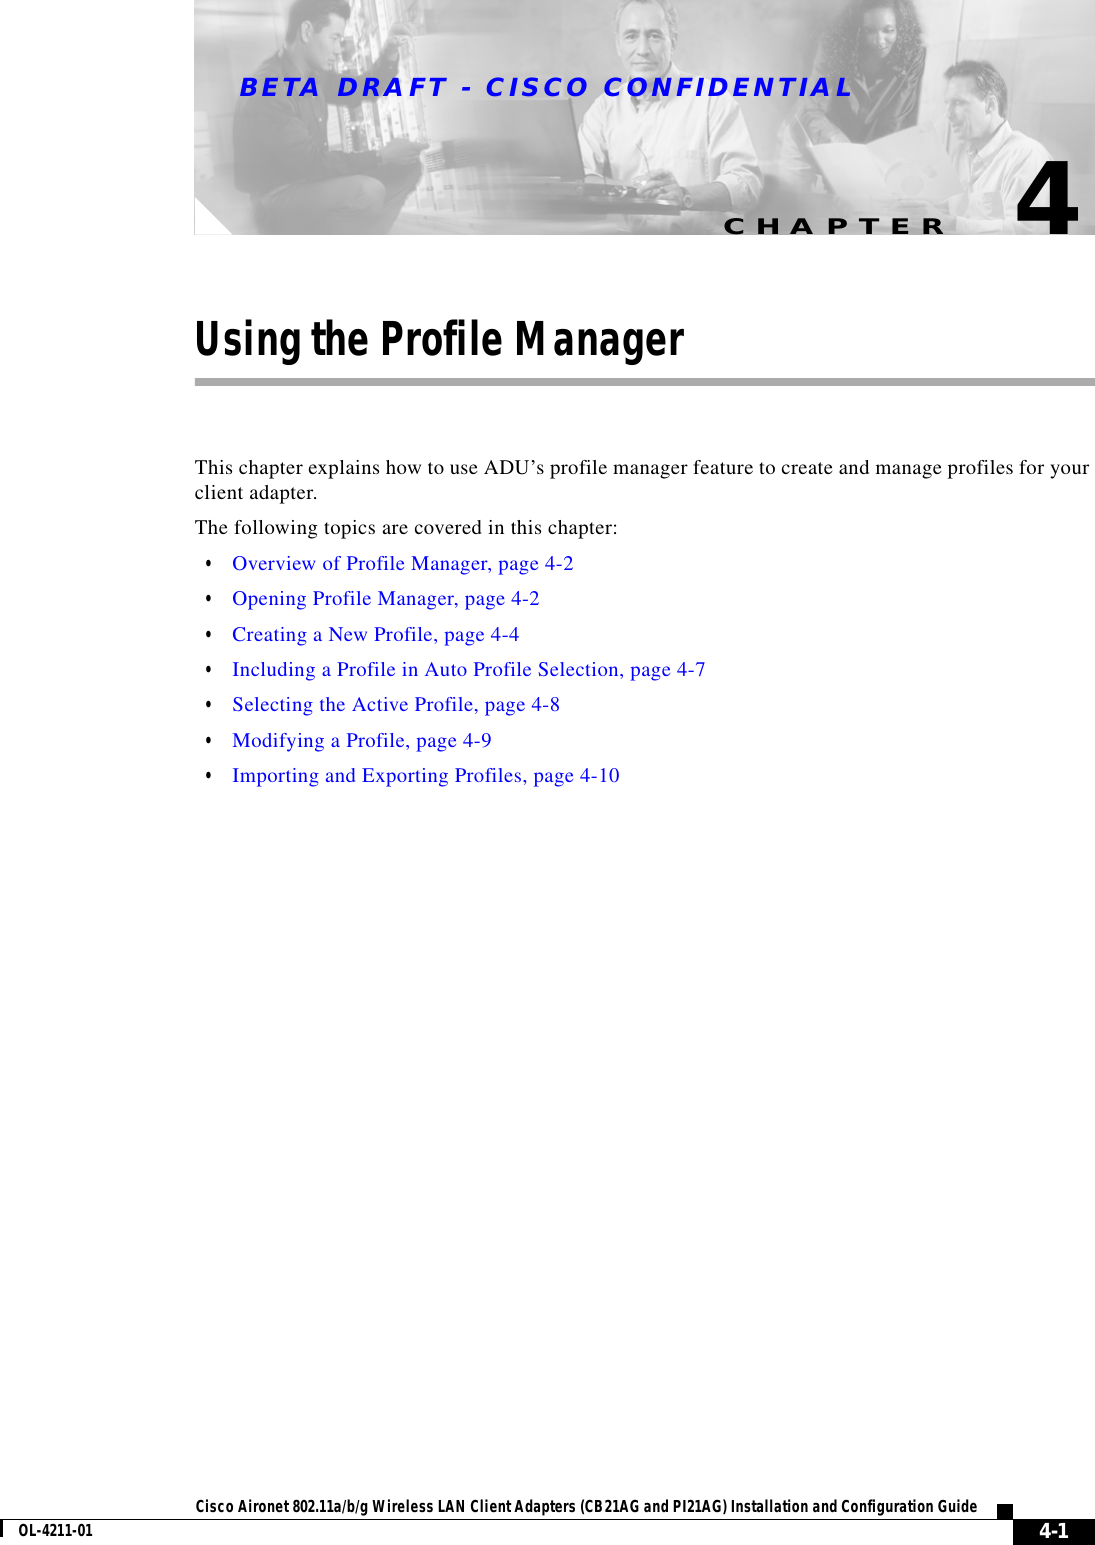 CHAPTERBETA DRAFT - CISCO CONFIDENTIAL4-1Cisco Aironet 802.11a/b/g Wireless LAN Client Adapters (CB21AG and PI21AG) Installation and Configuration GuideOL-4211-014Using the Profile ManagerThis chapter explains how to use ADU’s profile manager feature to create and manage profiles for your client adapter.The following topics are covered in this chapter:•Overview of Profile Manager, page 4-2•Opening Profile Manager, page 4-2•Creating a New Profile, page 4-4•Including a Profile in Auto Profile Selection, page 4-7•Selecting the Active Profile, page 4-8•Modifying a Profile, page 4-9•Importing and Exporting Profiles, page 4-10